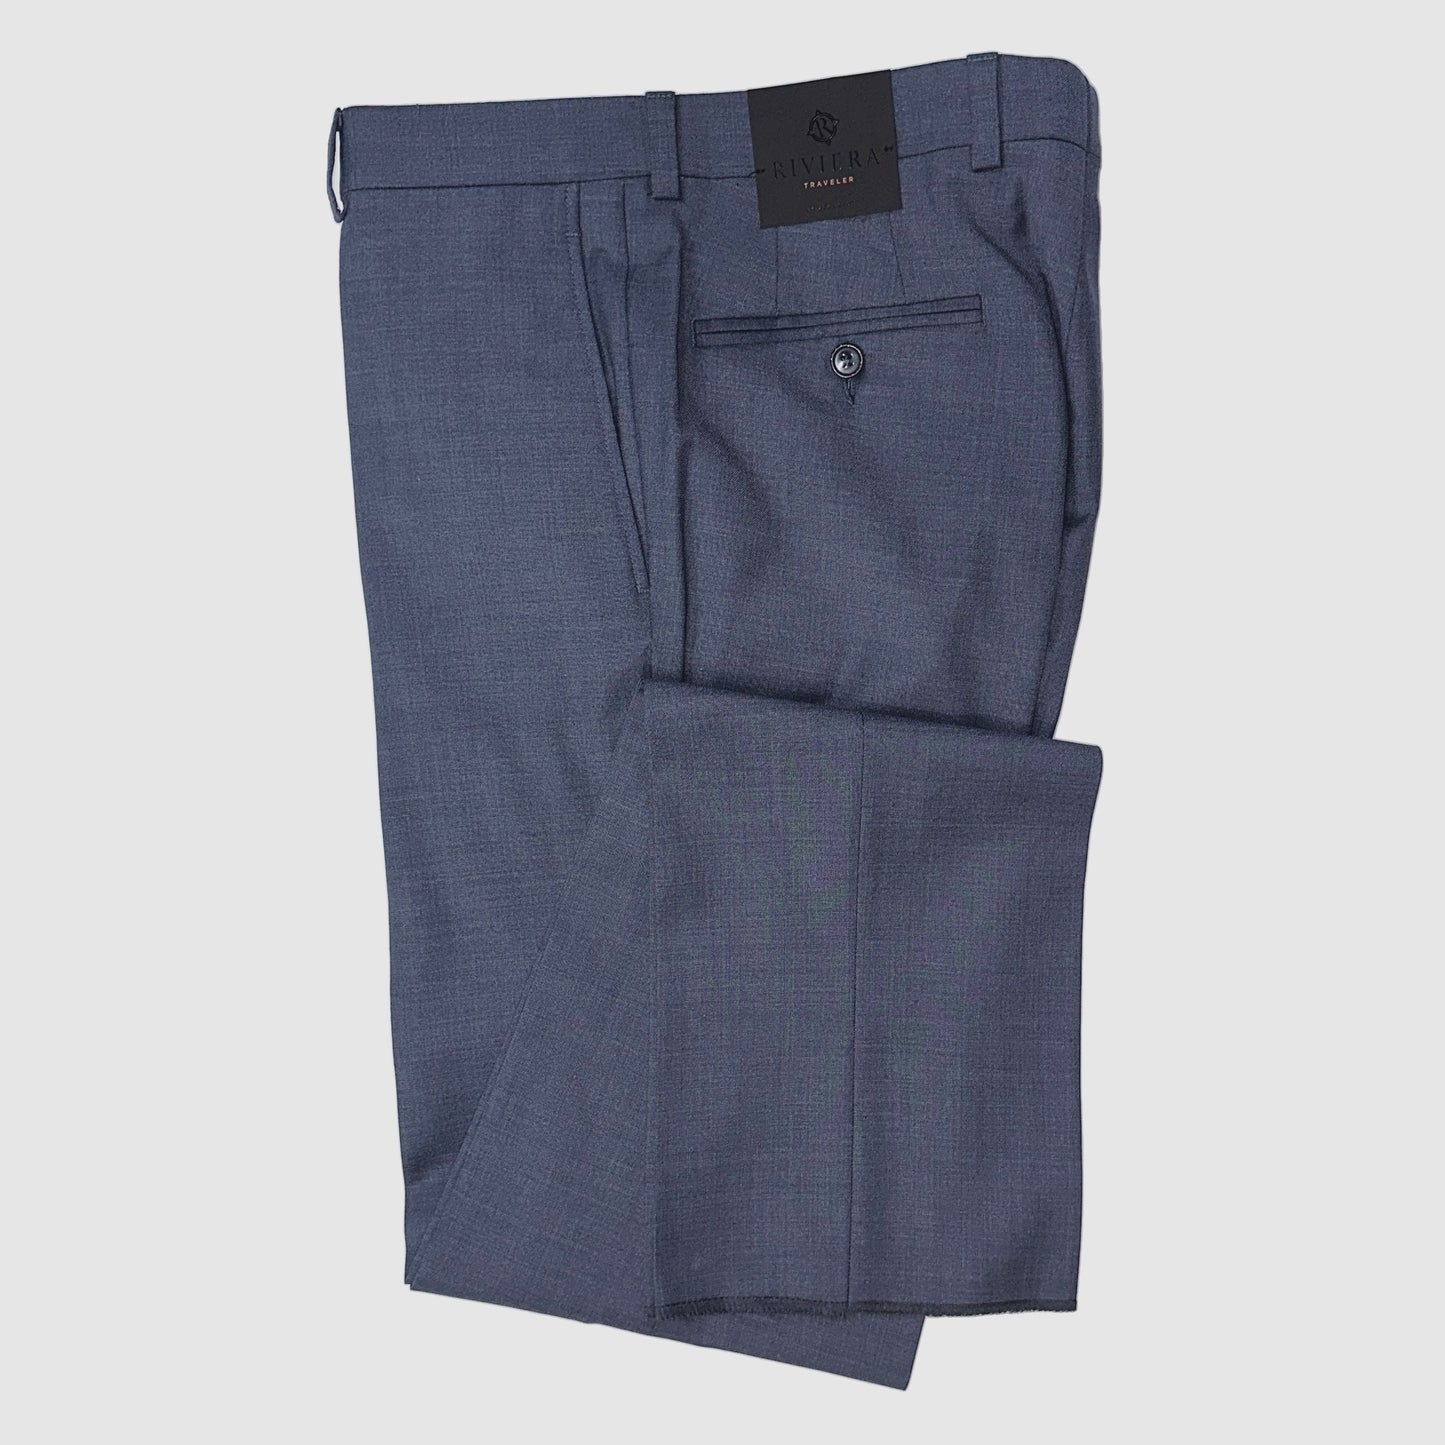 Riviera by Jack Victor- Traveler Dress Pant in Mid Blue